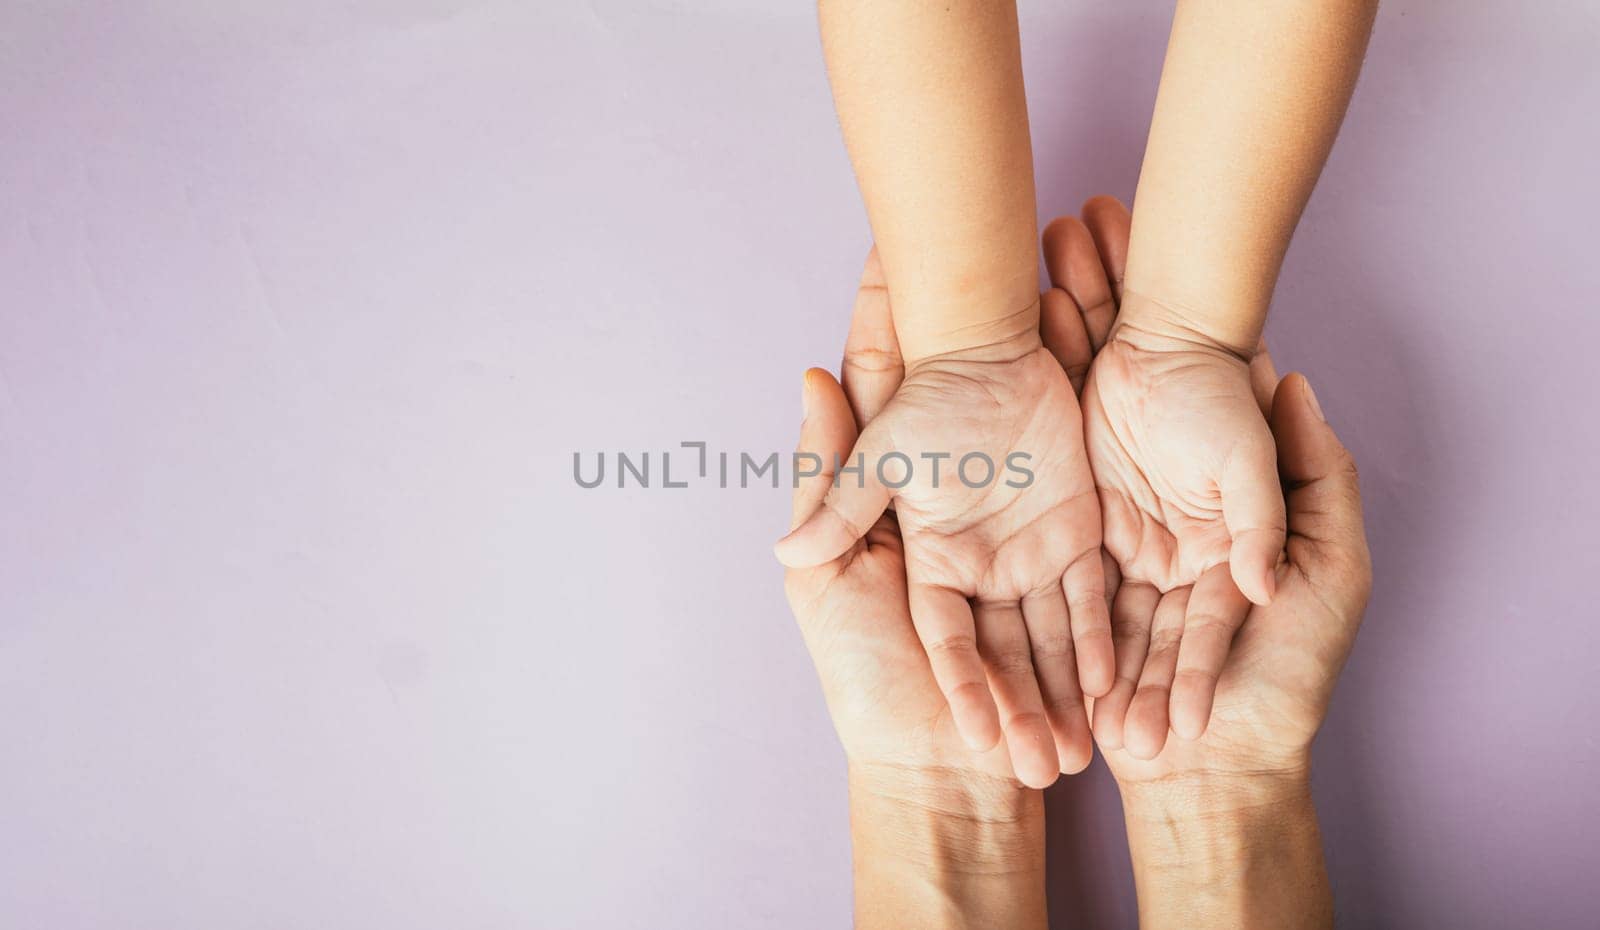 Celebrating family day, Parents and kid holding empty hands together on a color background. Space for text. by Sorapop